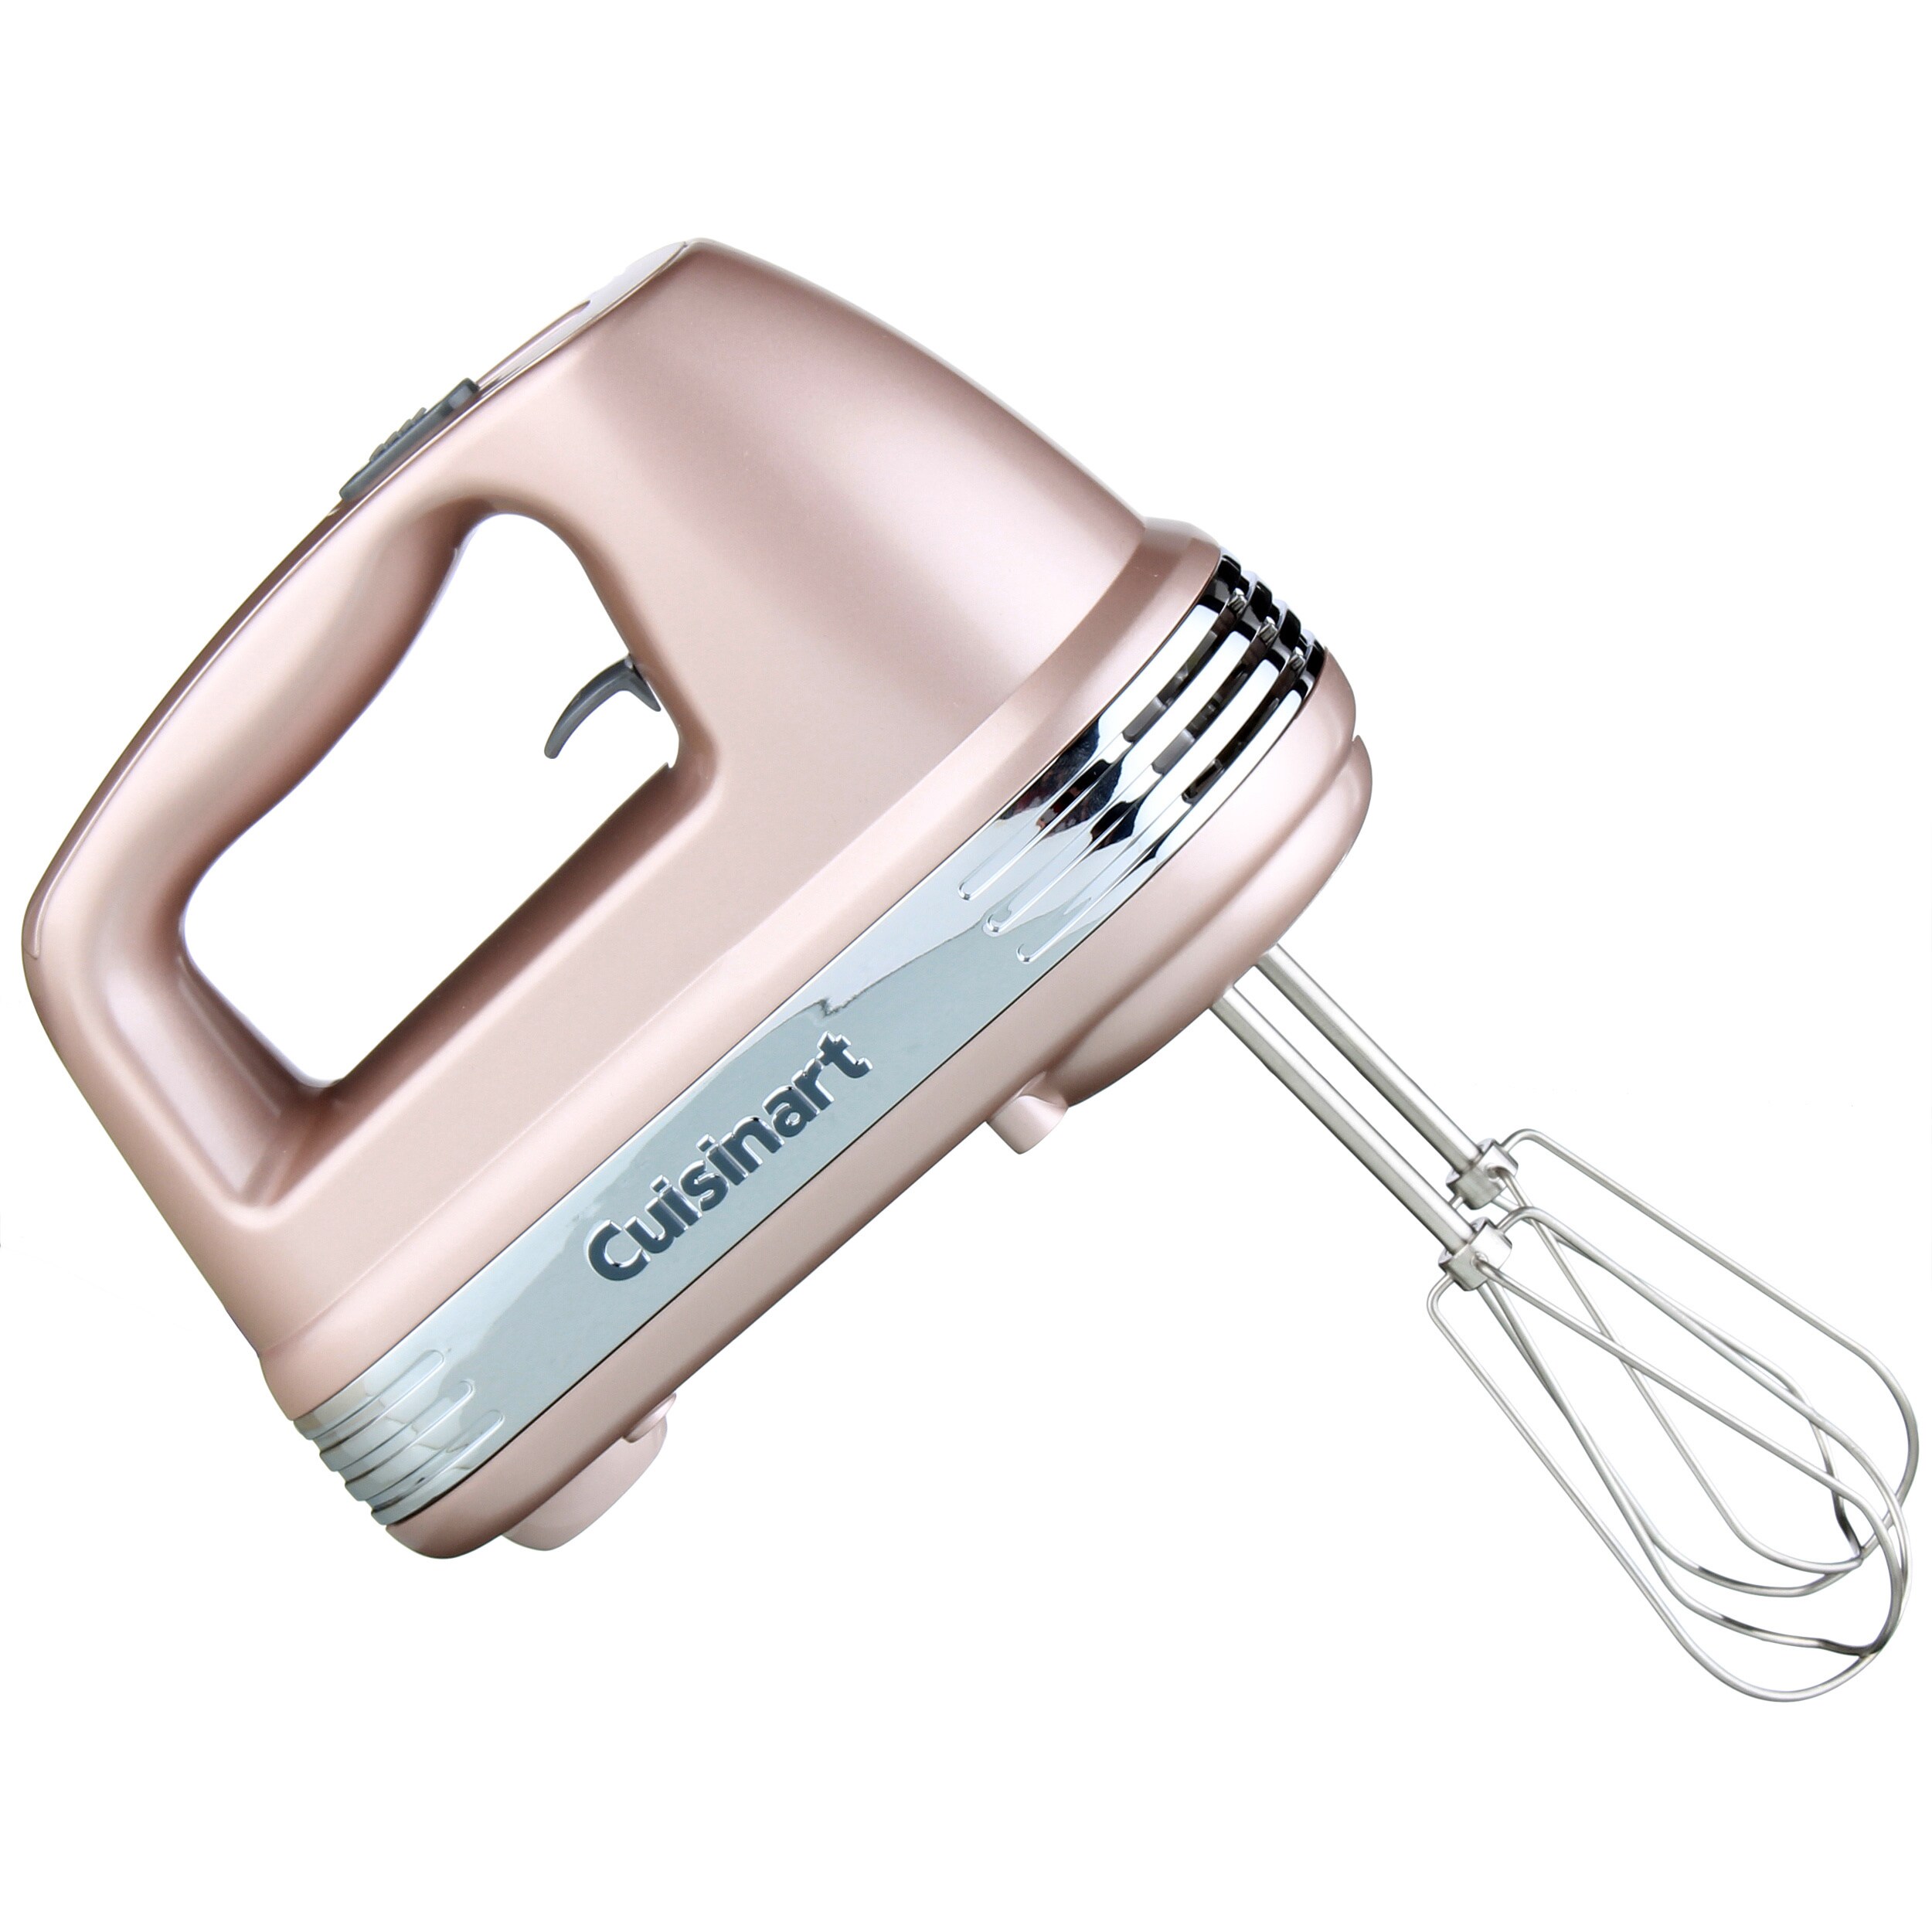 Cuisinart Power Advantage® 6-Speed Hand Mixer - Spoons N Spice